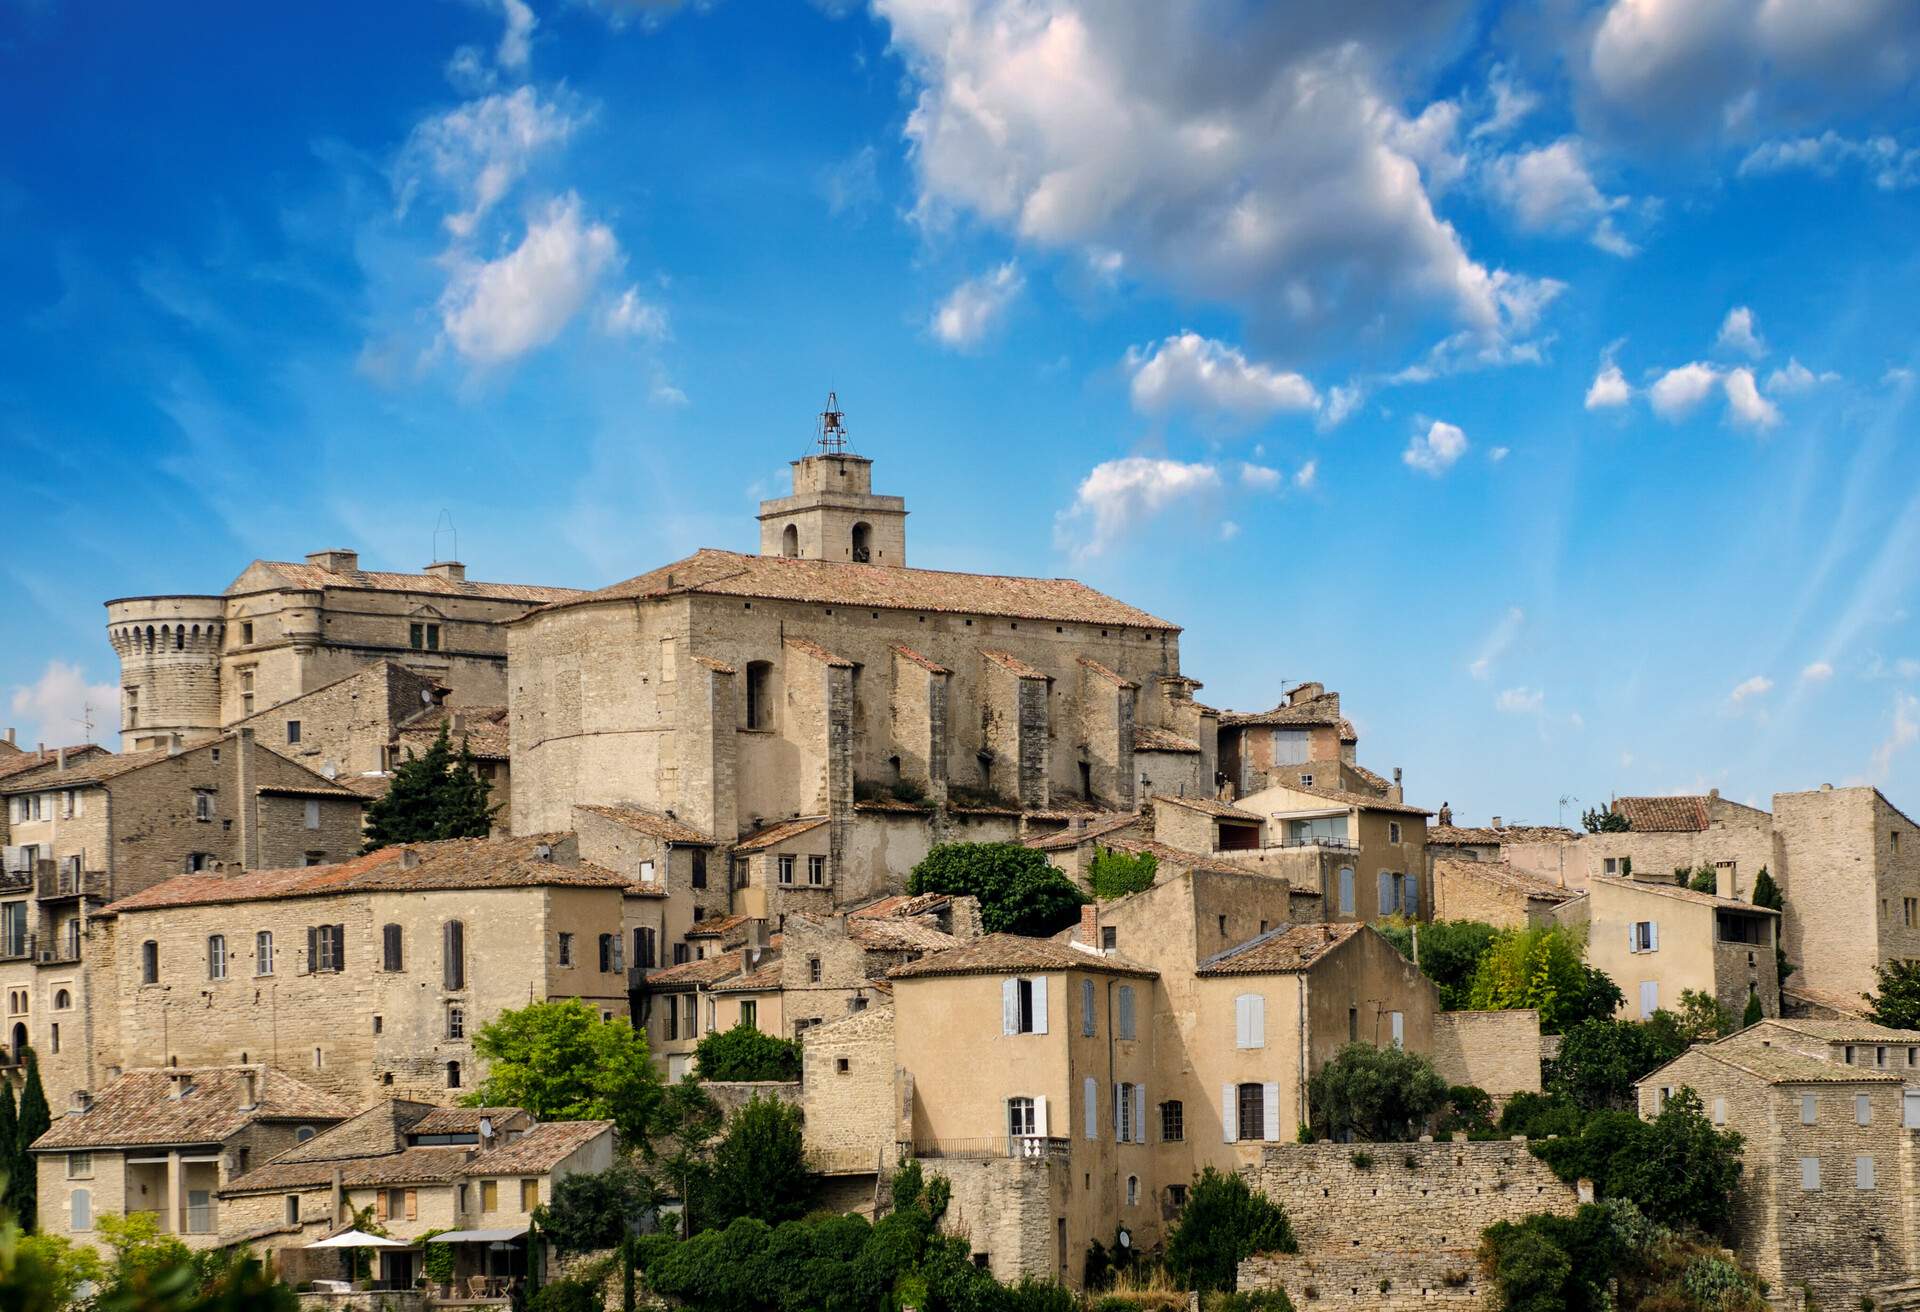 DEST_FRANCE_VAUCLUSE_LOURMARIN_MEDIEVAL-TOWN-AND-BUILDINGS